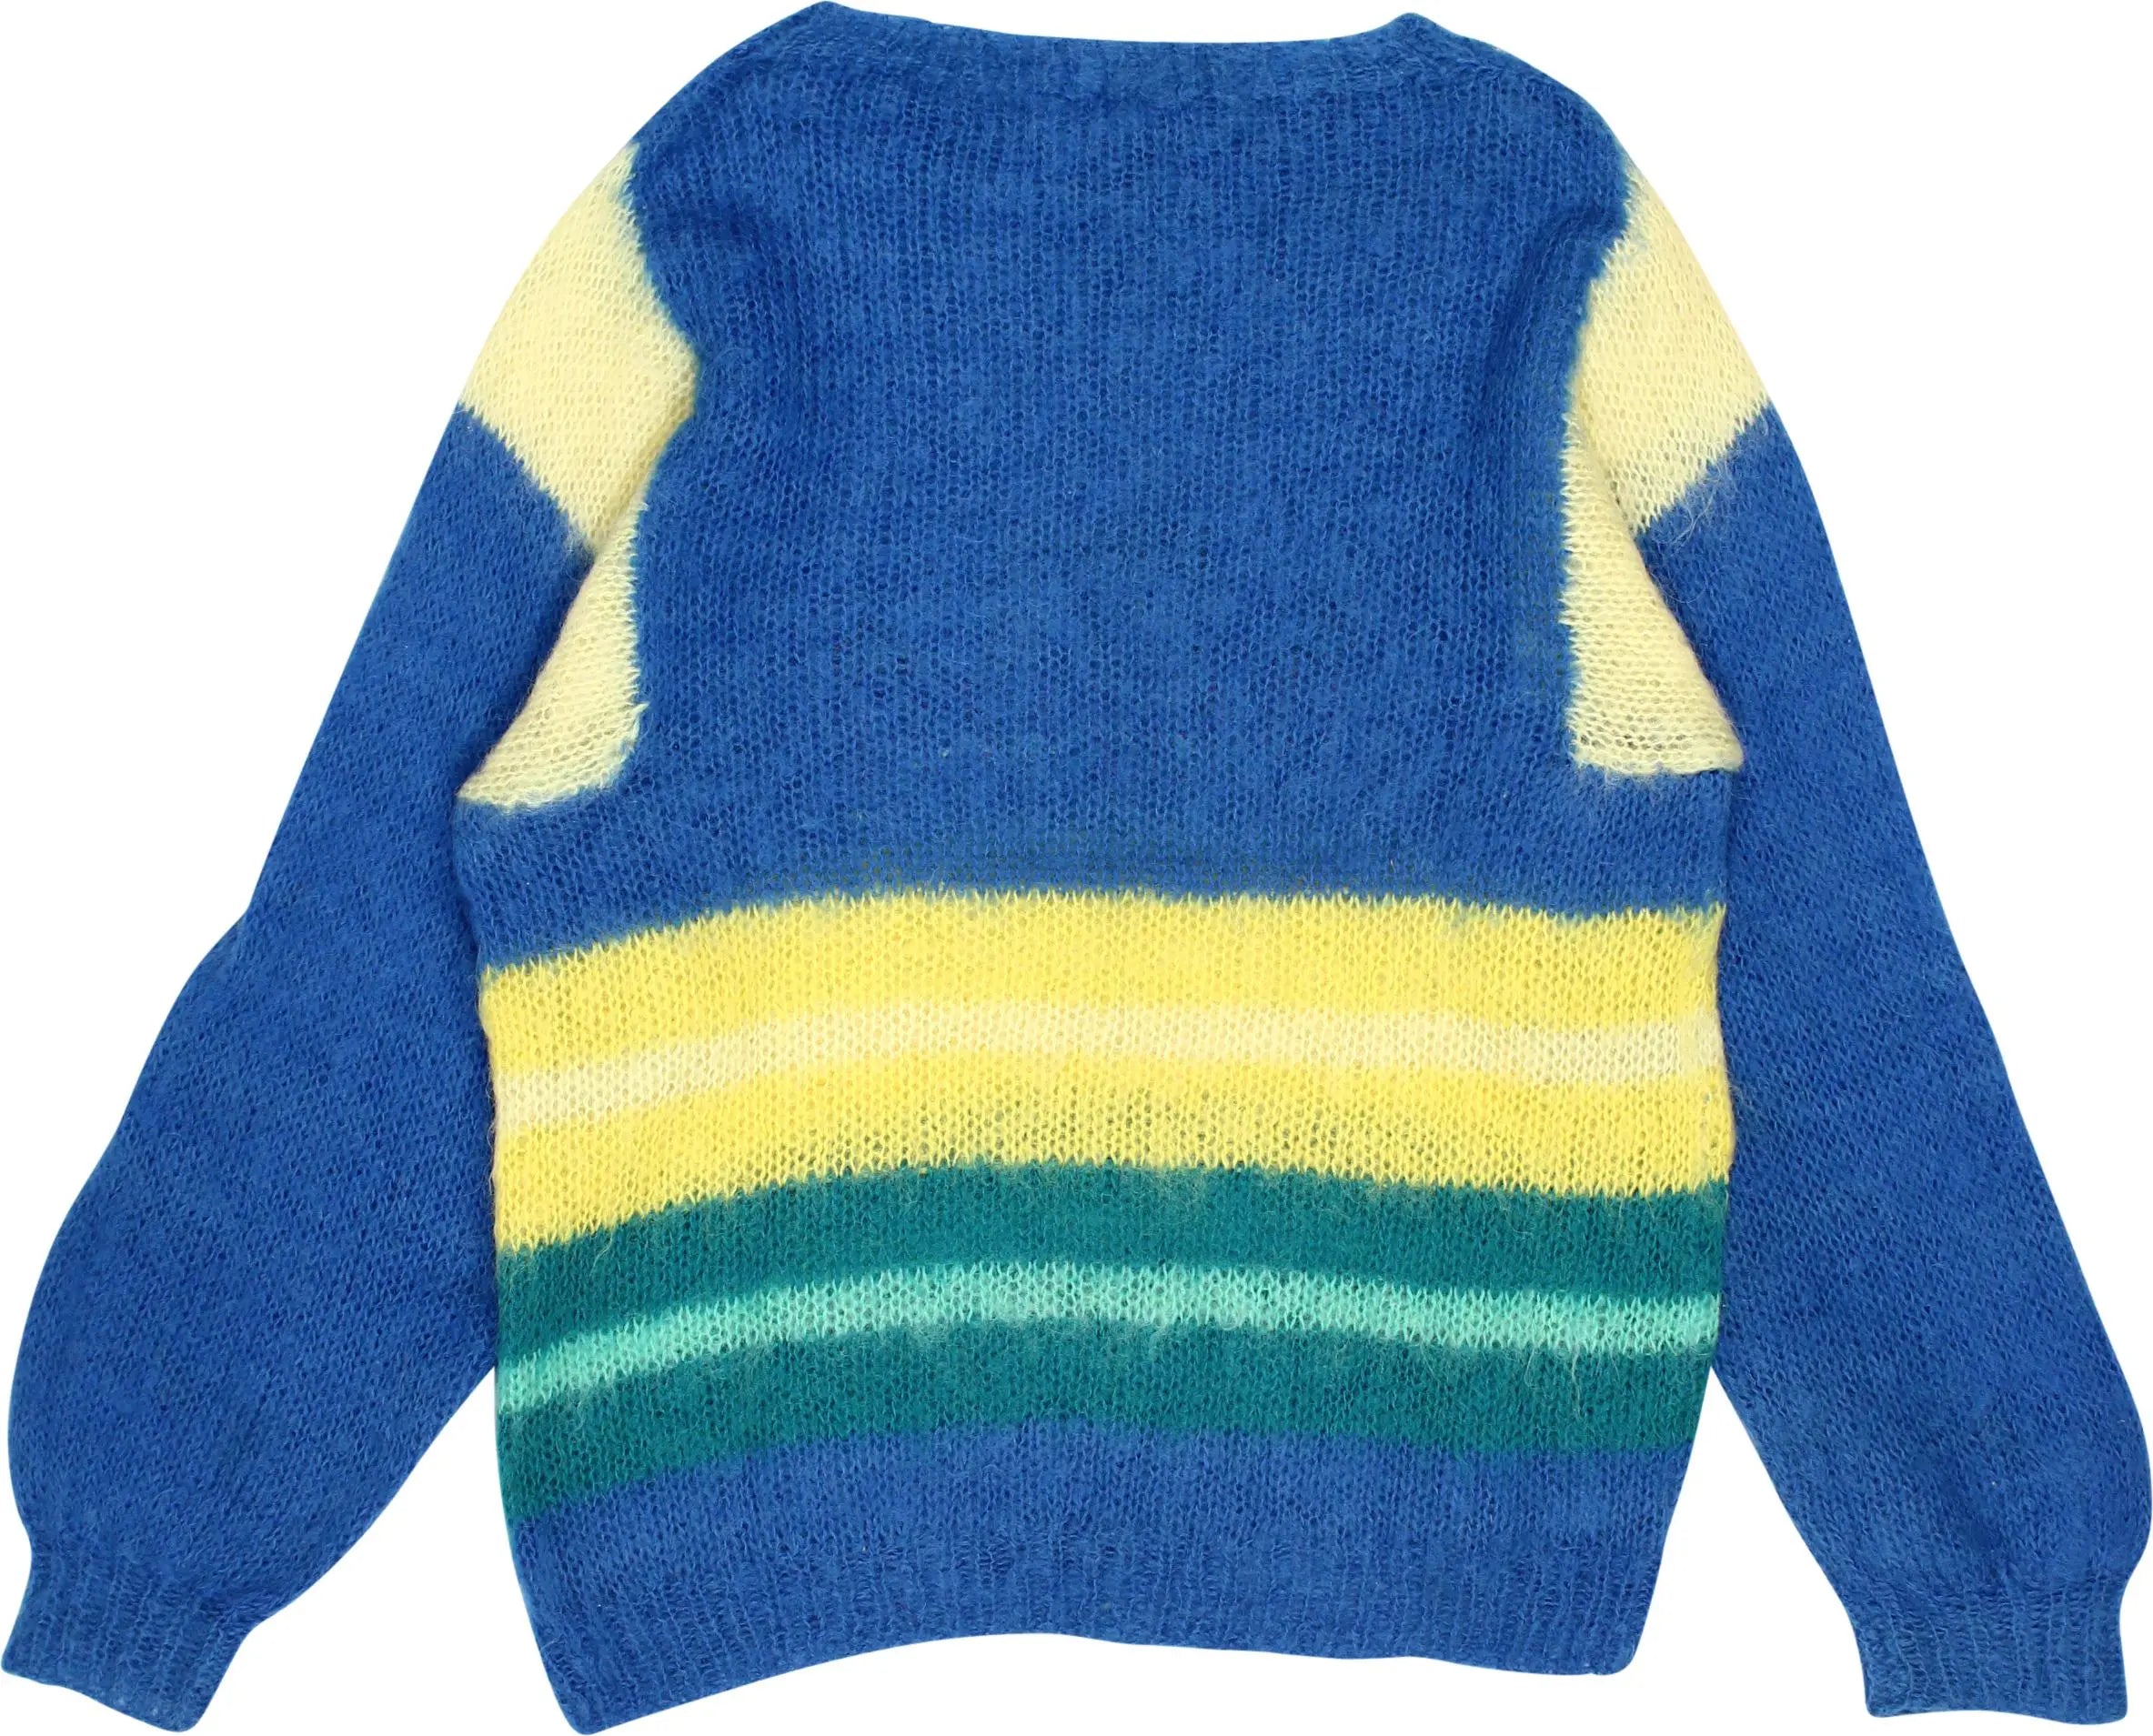 Unknown - 80s Colourful Jumper- ThriftTale.com - Vintage and second handclothing